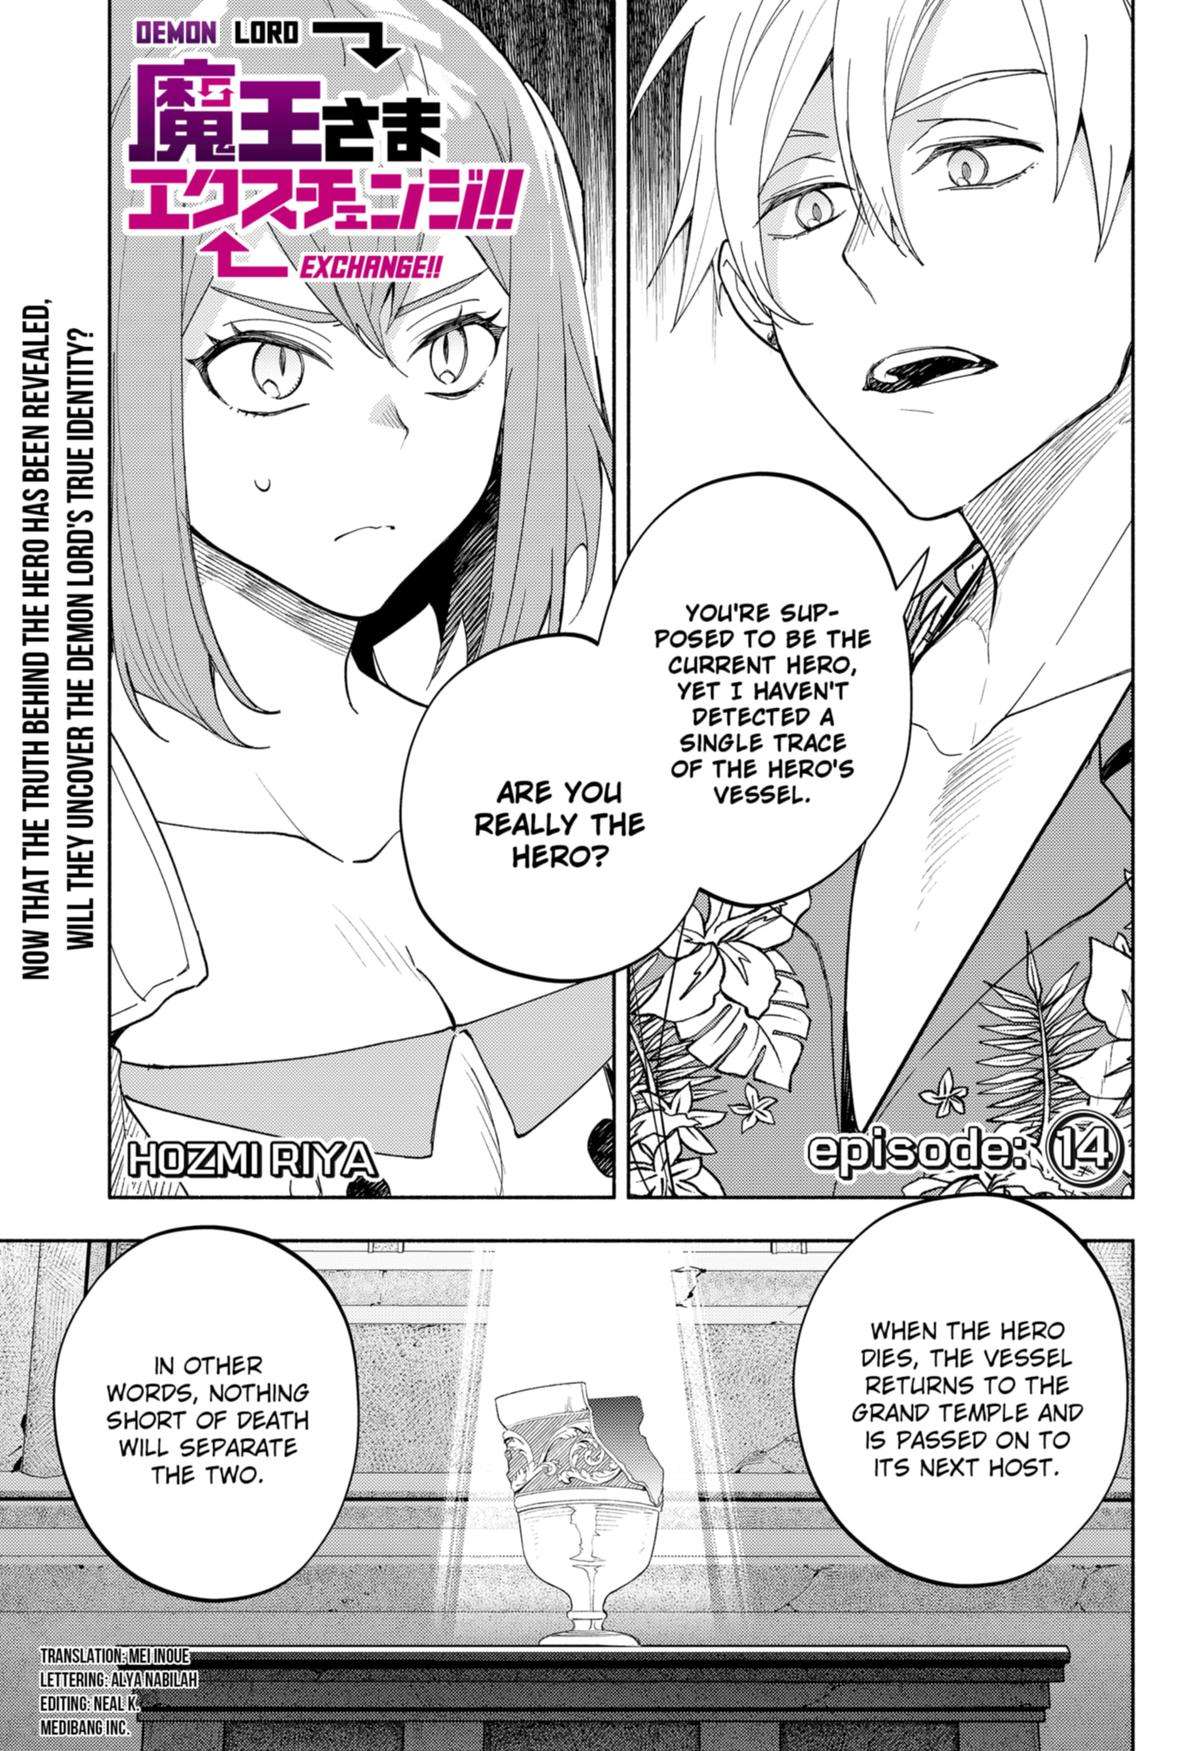 Demon Lord Exchange!! - chapter 14 - #1